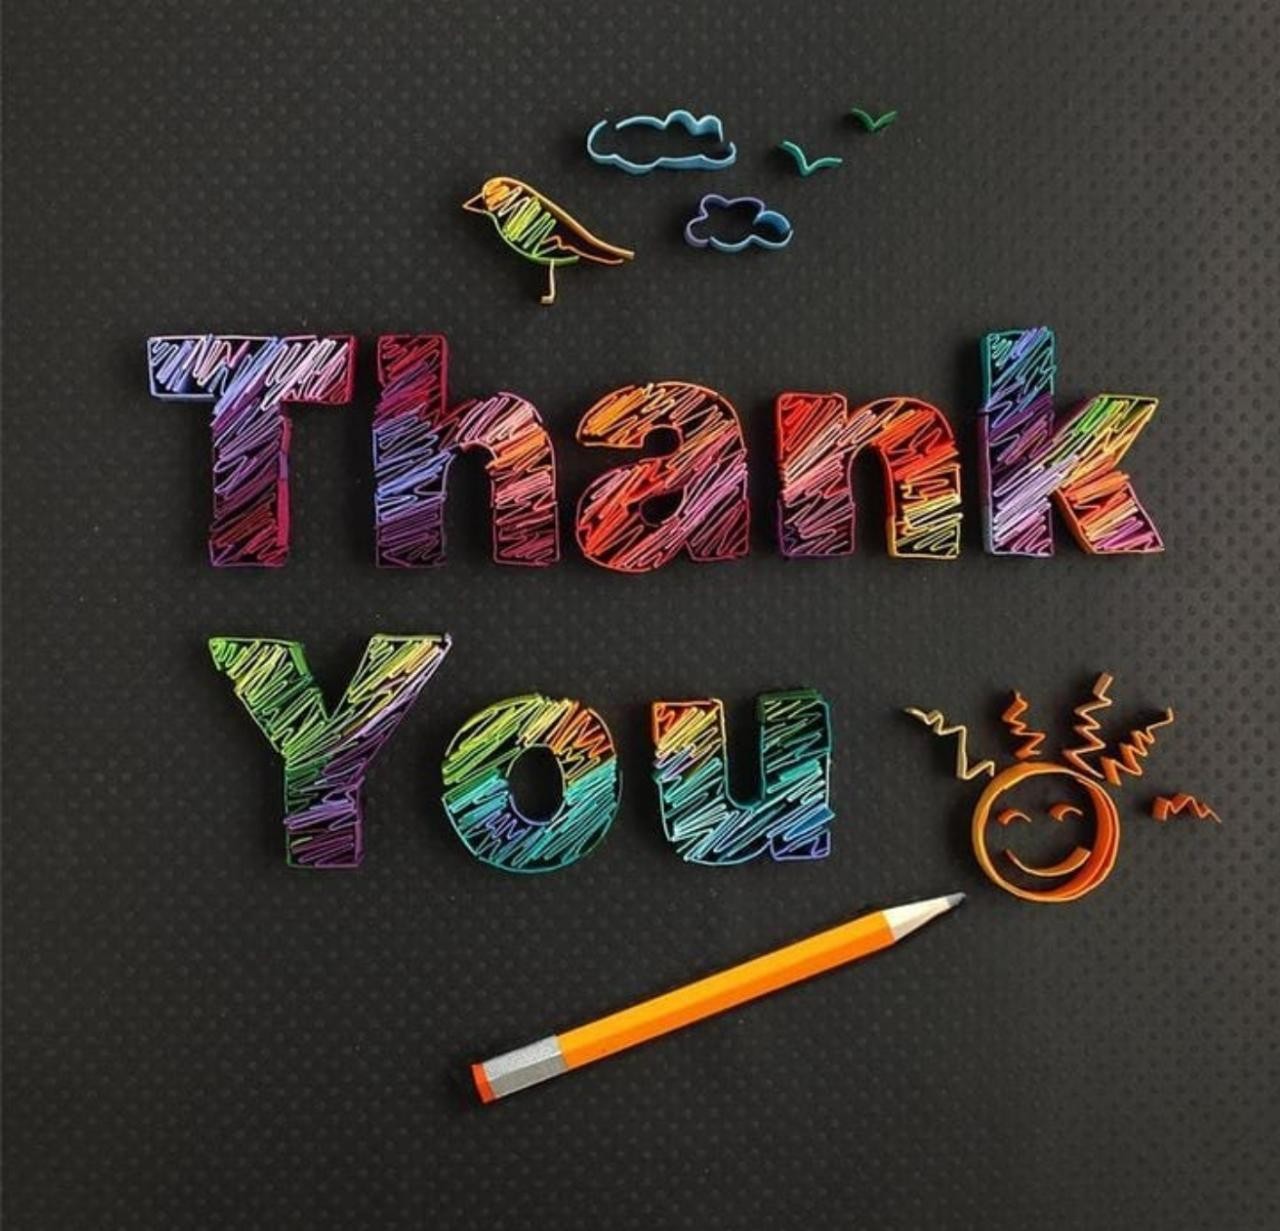 Thank You, Thanks, And Wallpaper Image - Graphic Design , HD Wallpaper & Backgrounds